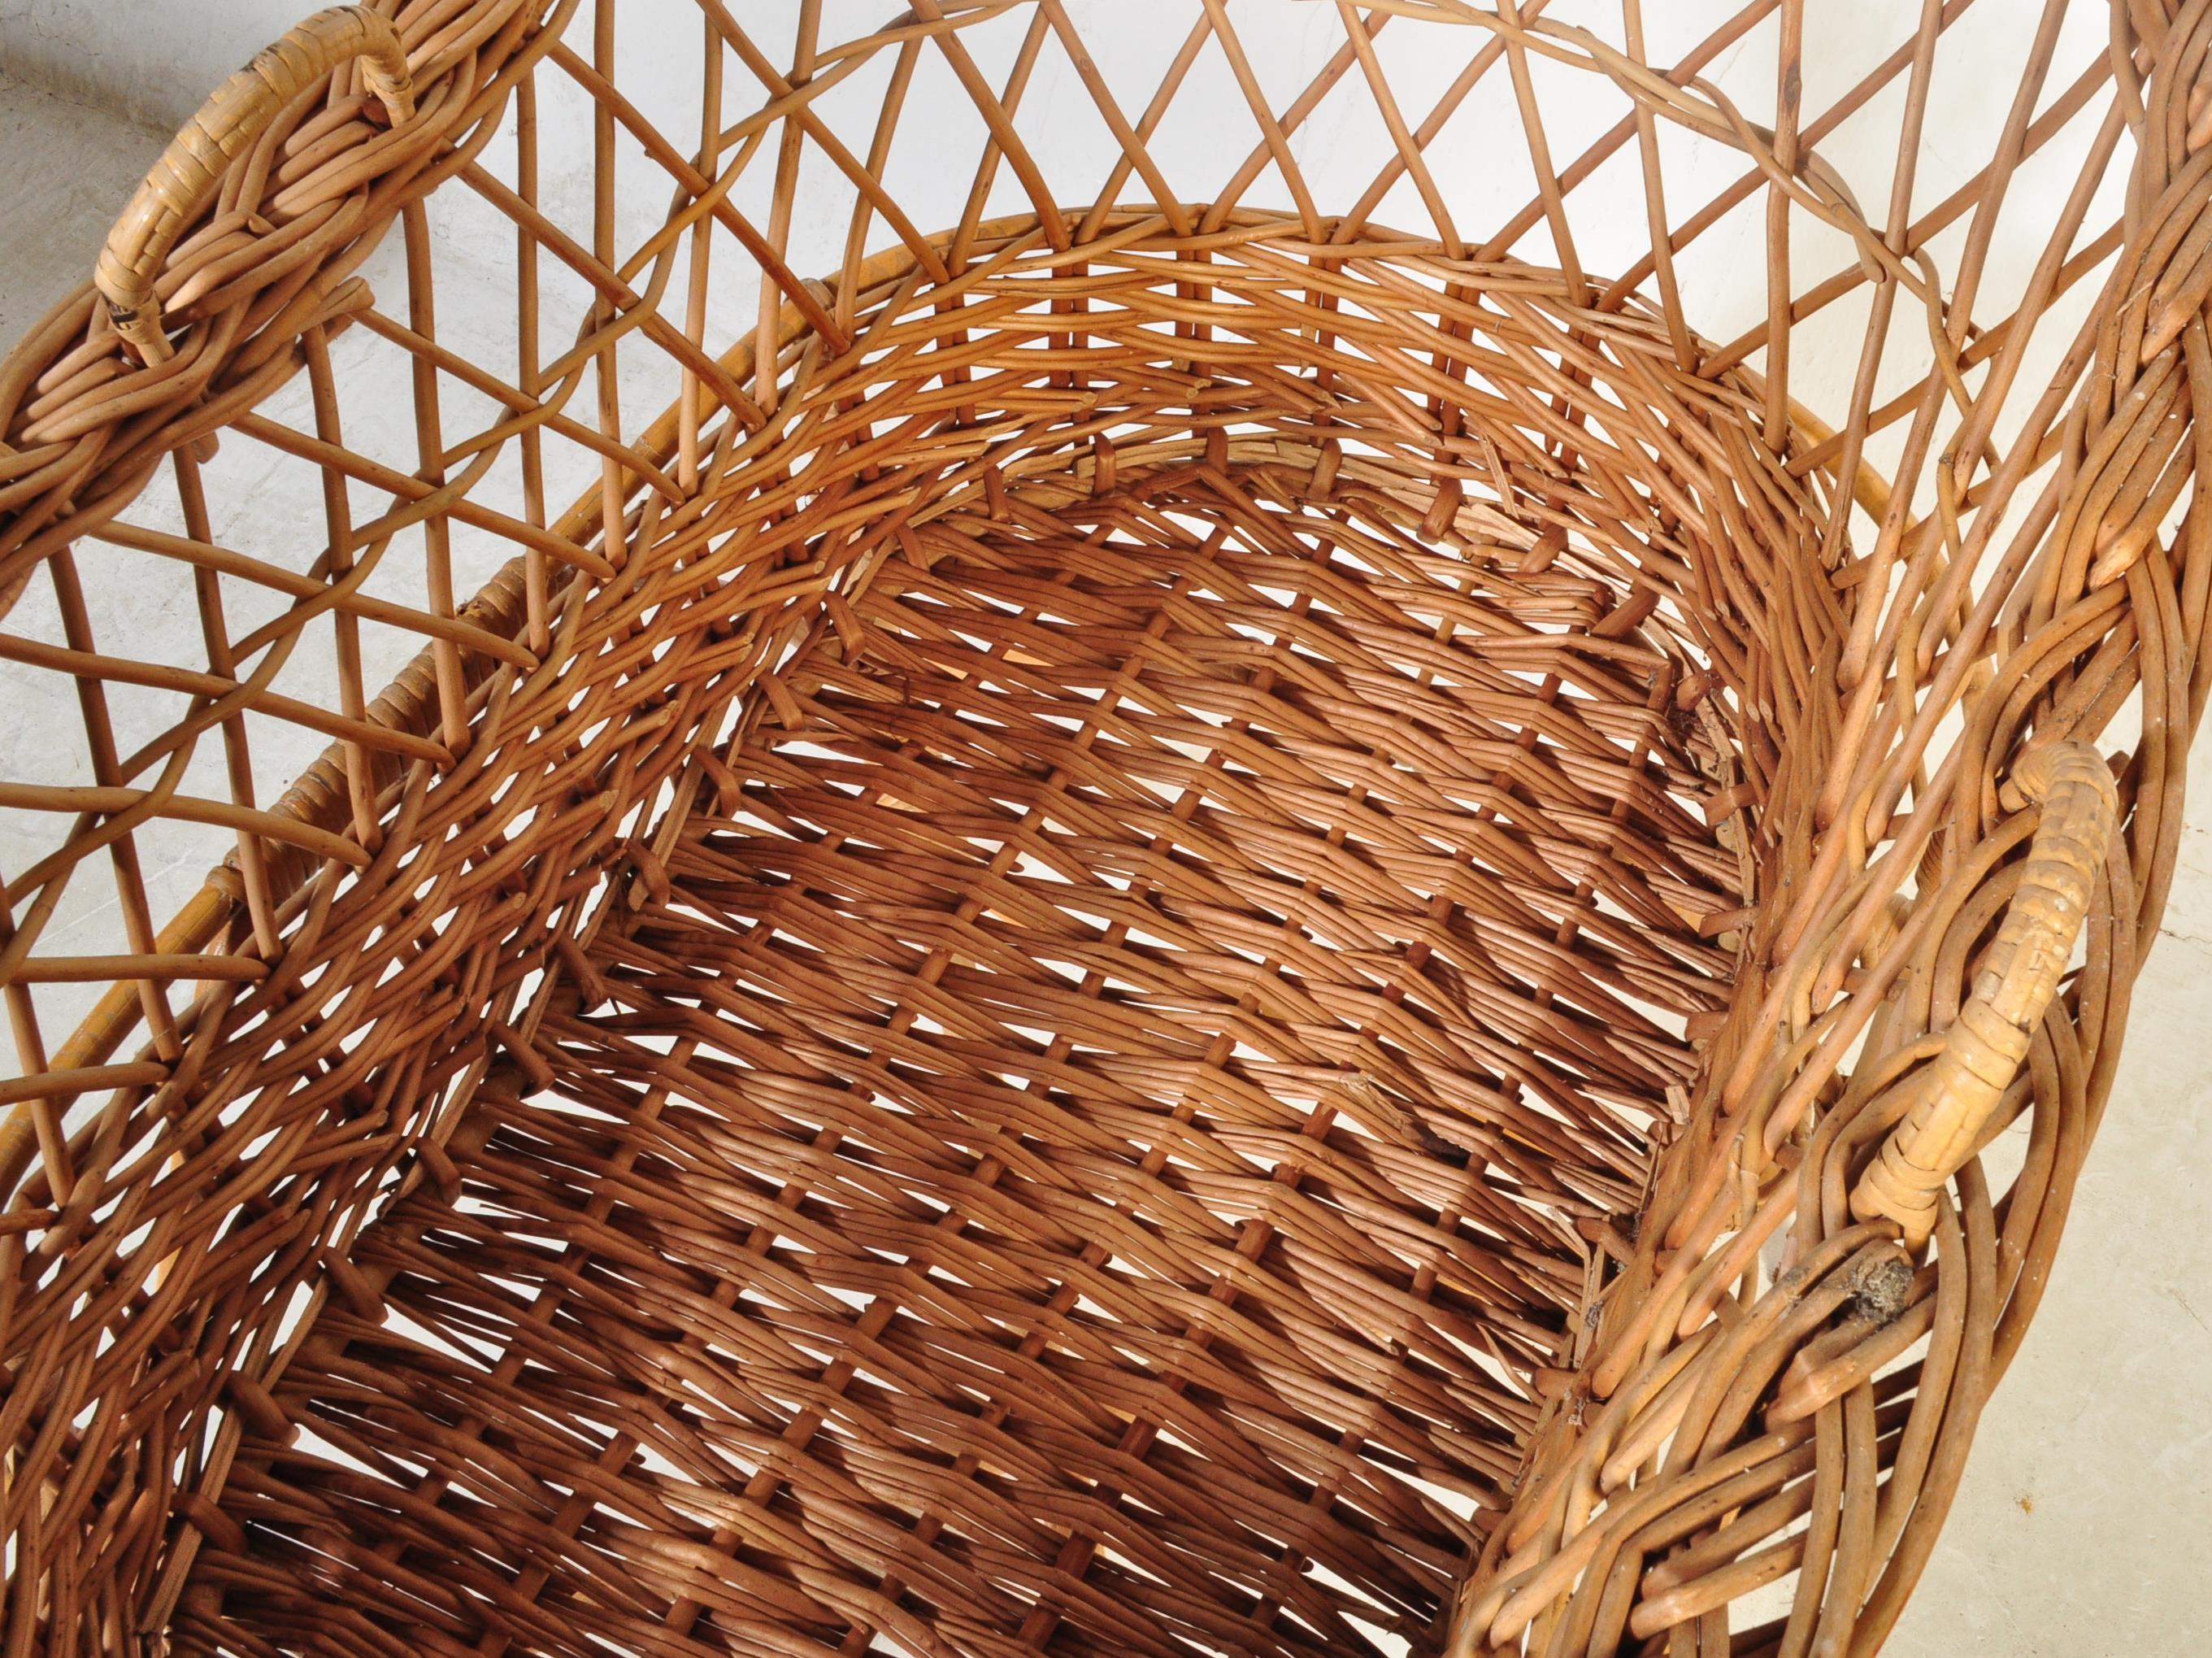 A RETRO VINTAGE CANED WICKER BAMBOO MOSES BASKET - Image 5 of 6